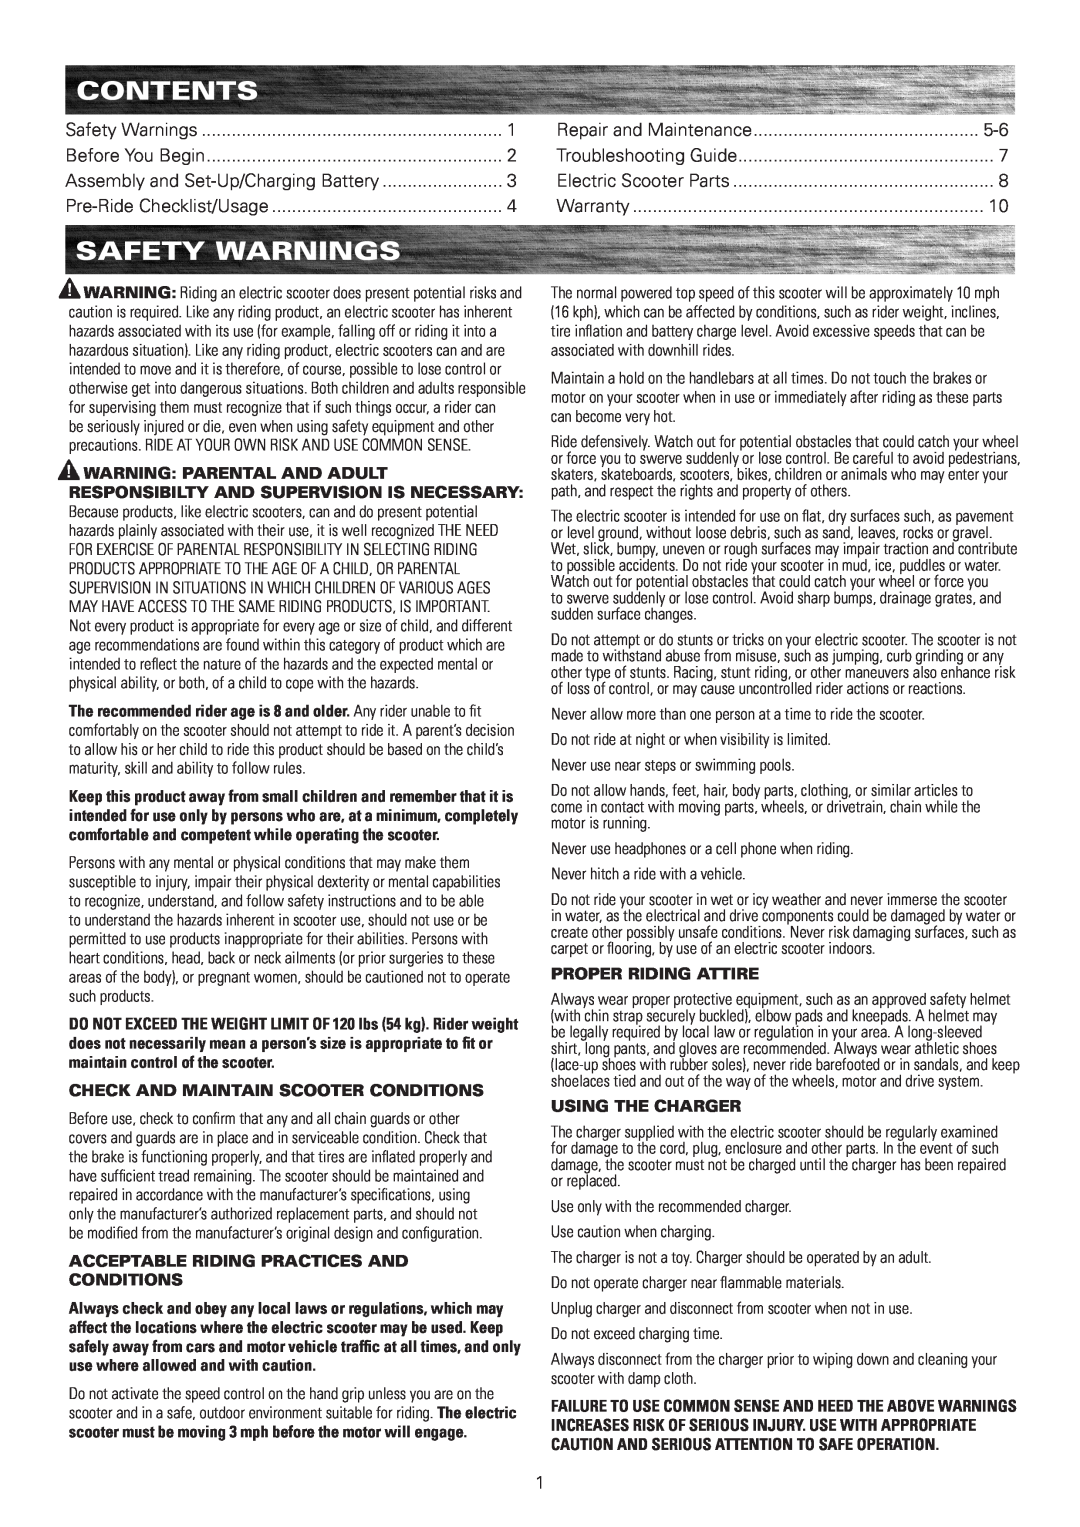 Razor E150 Contents, Safety Warnings, Check And Maintain Scooter Conditions, Acceptable Riding Practices And Conditions 